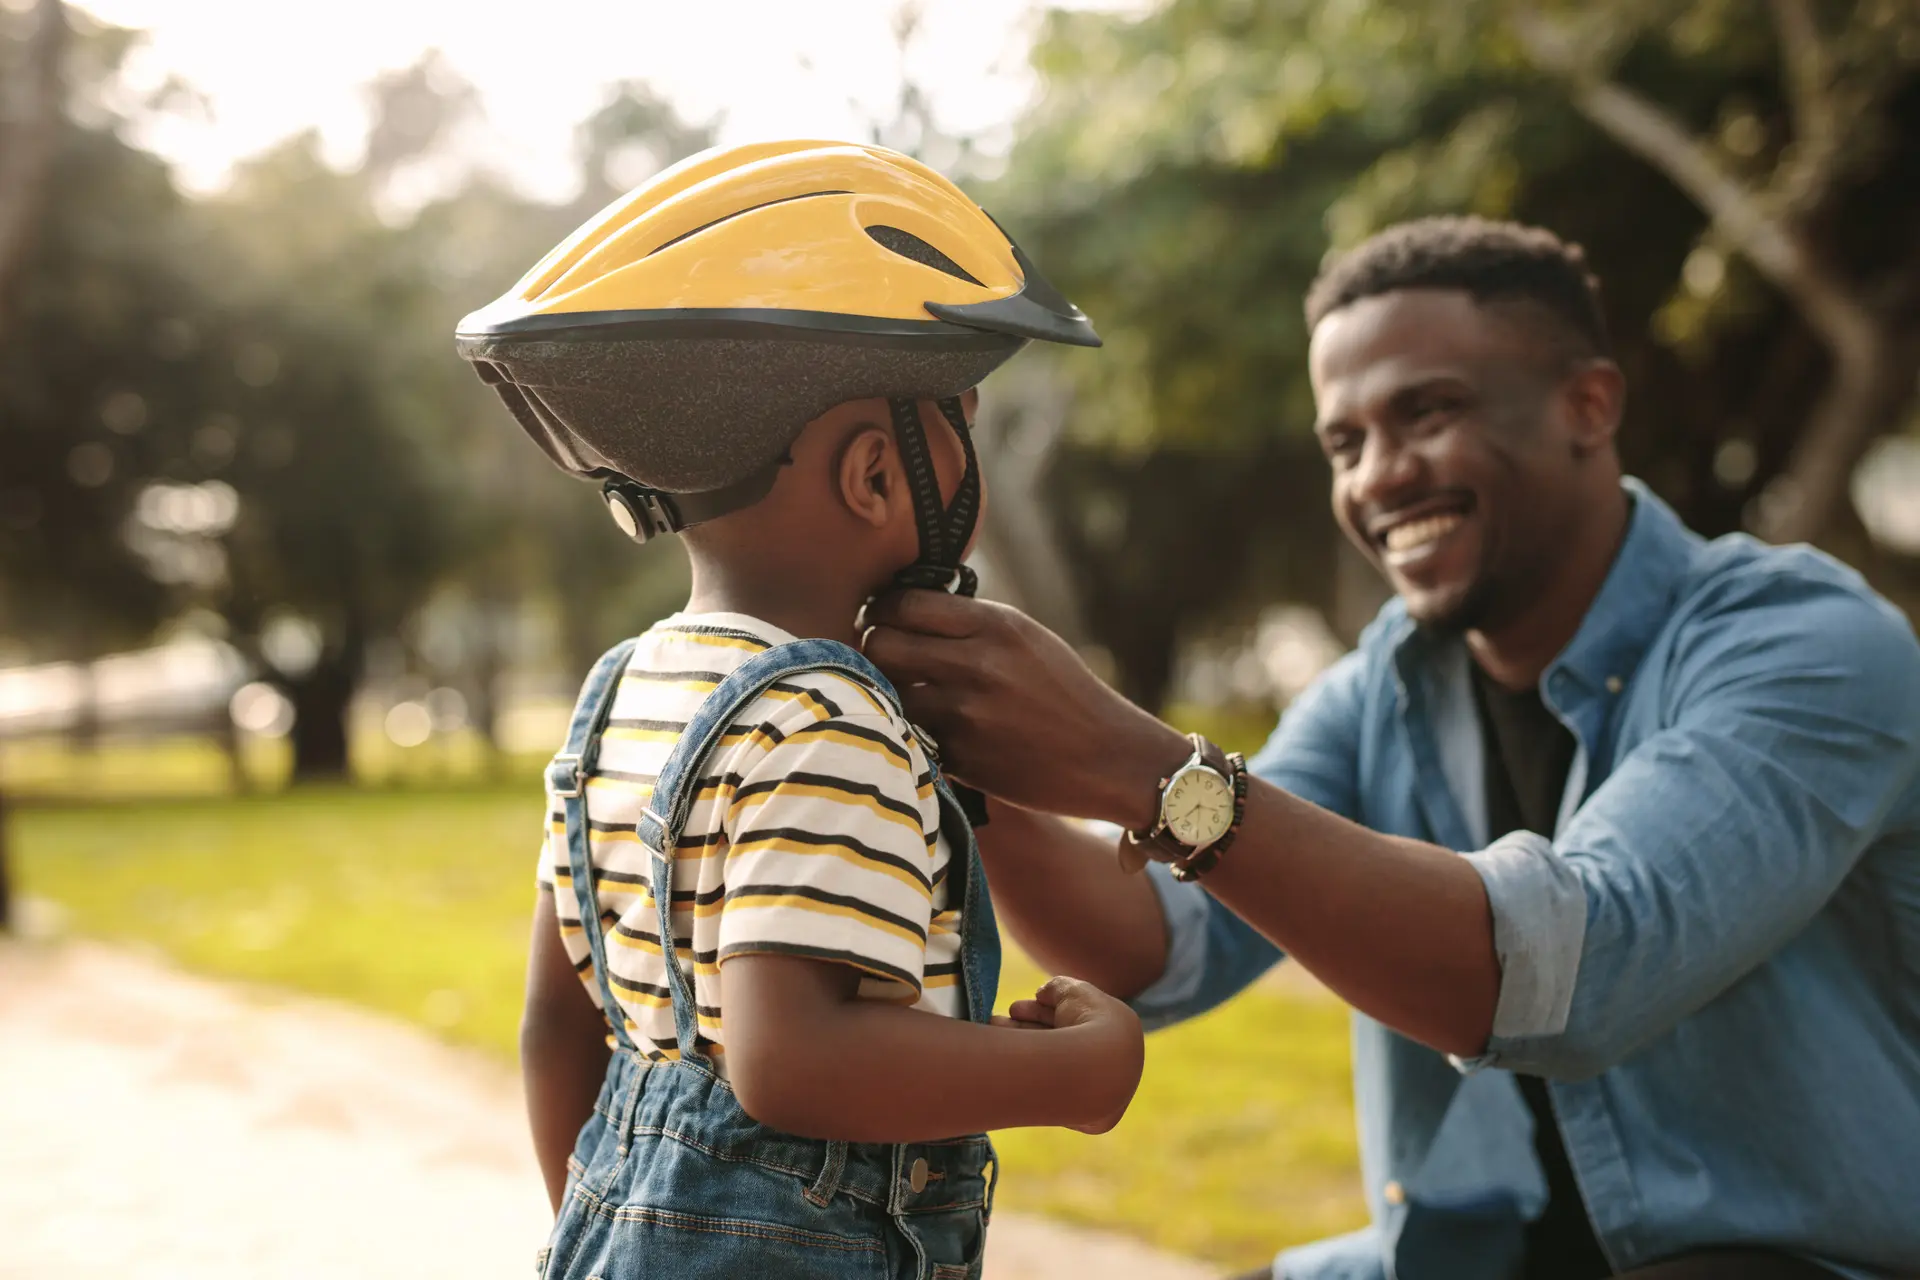 Father fastens bike helmet on his son